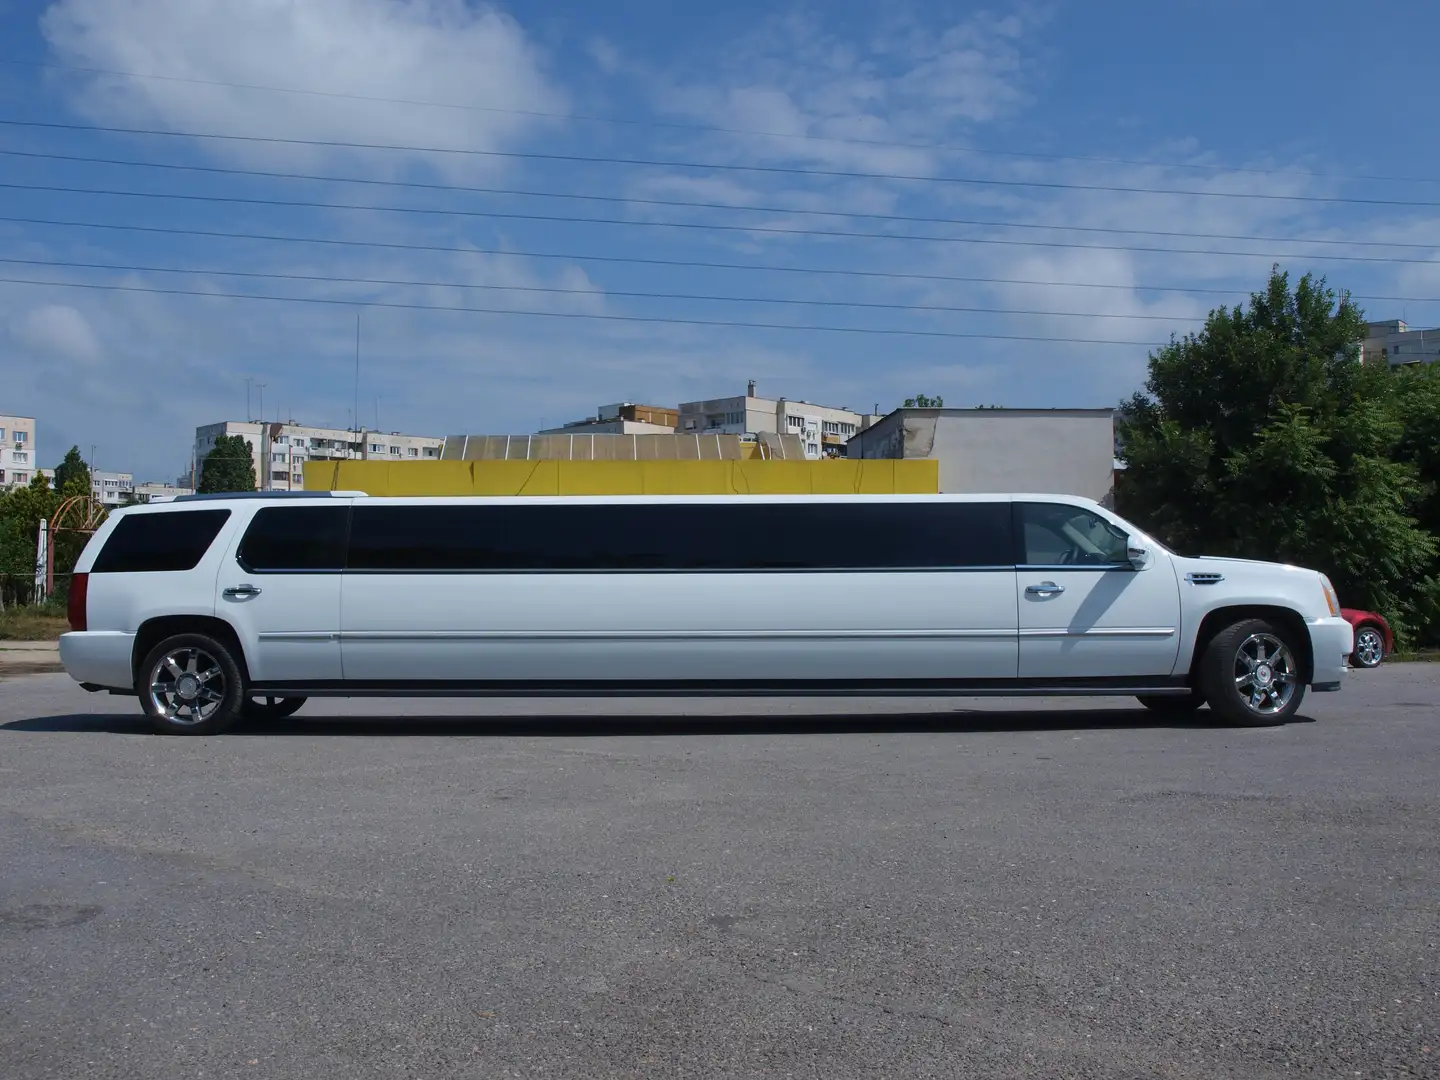 Cadillac Escalade 203-inch Stretch Limousine by Moonlight Industries Bianco - 2